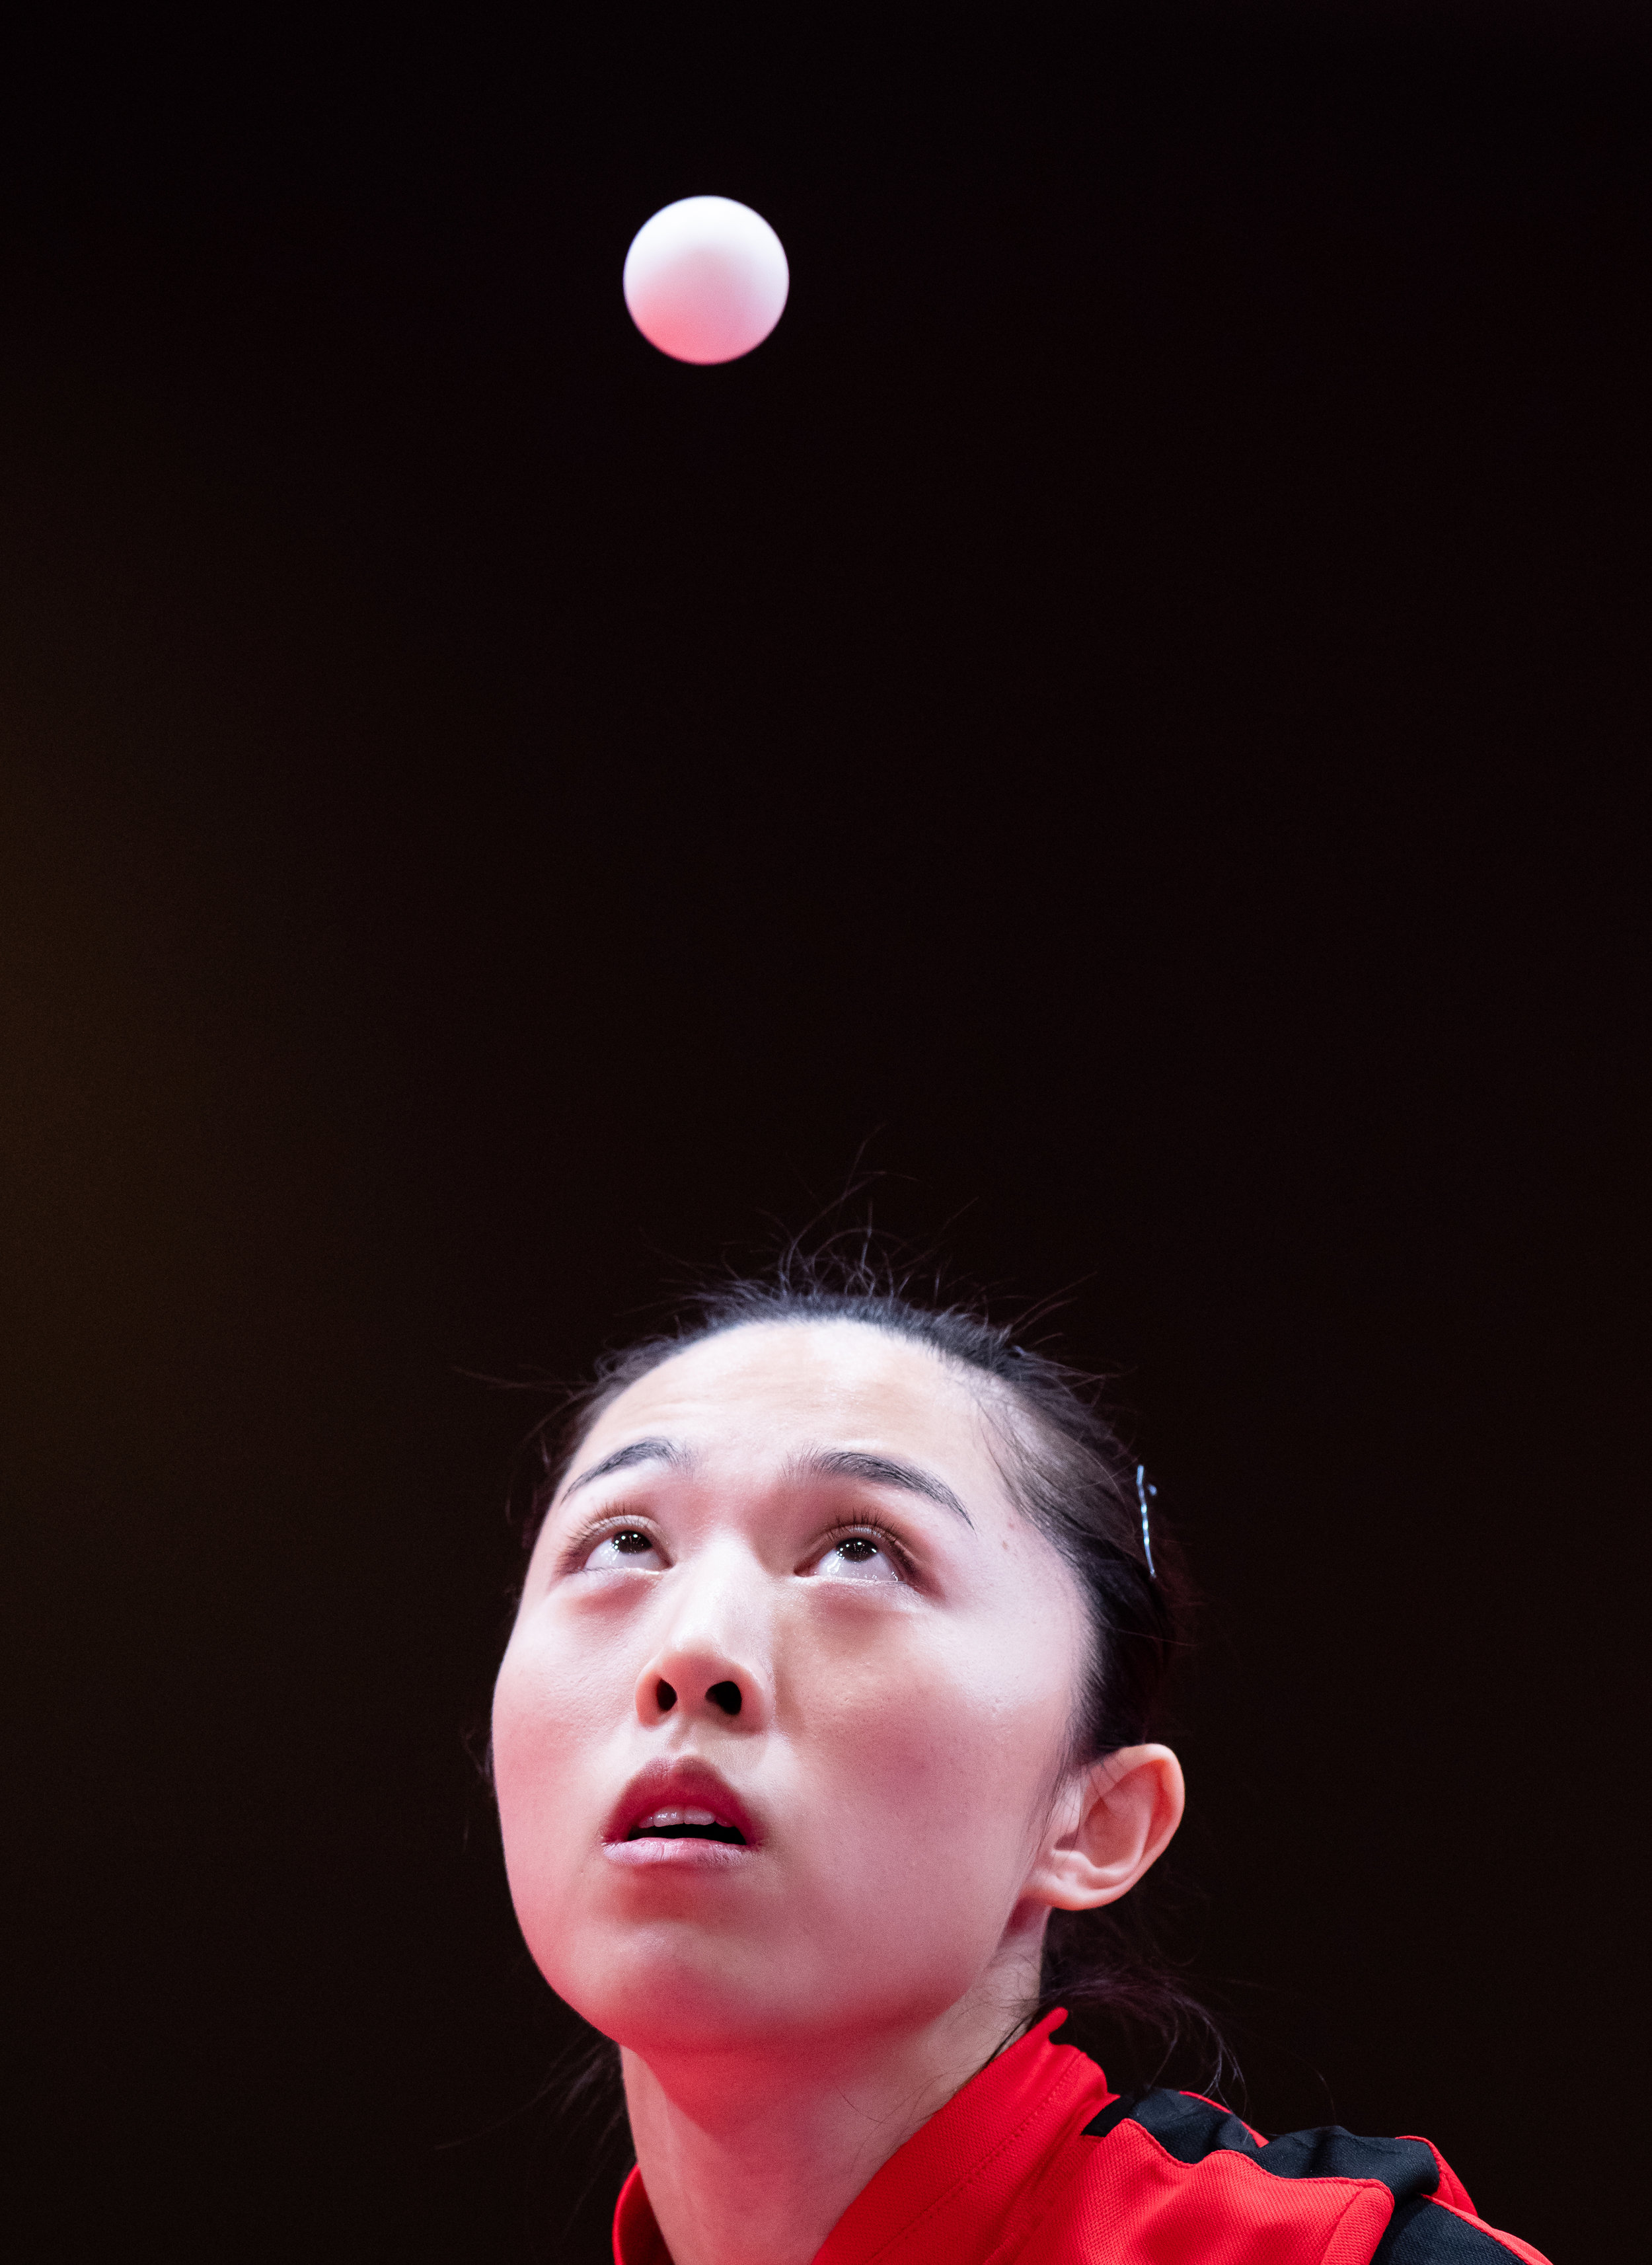 A Singaporean Table Tennis player watches the ball during the Asian Games at the Jakarta International Expo.